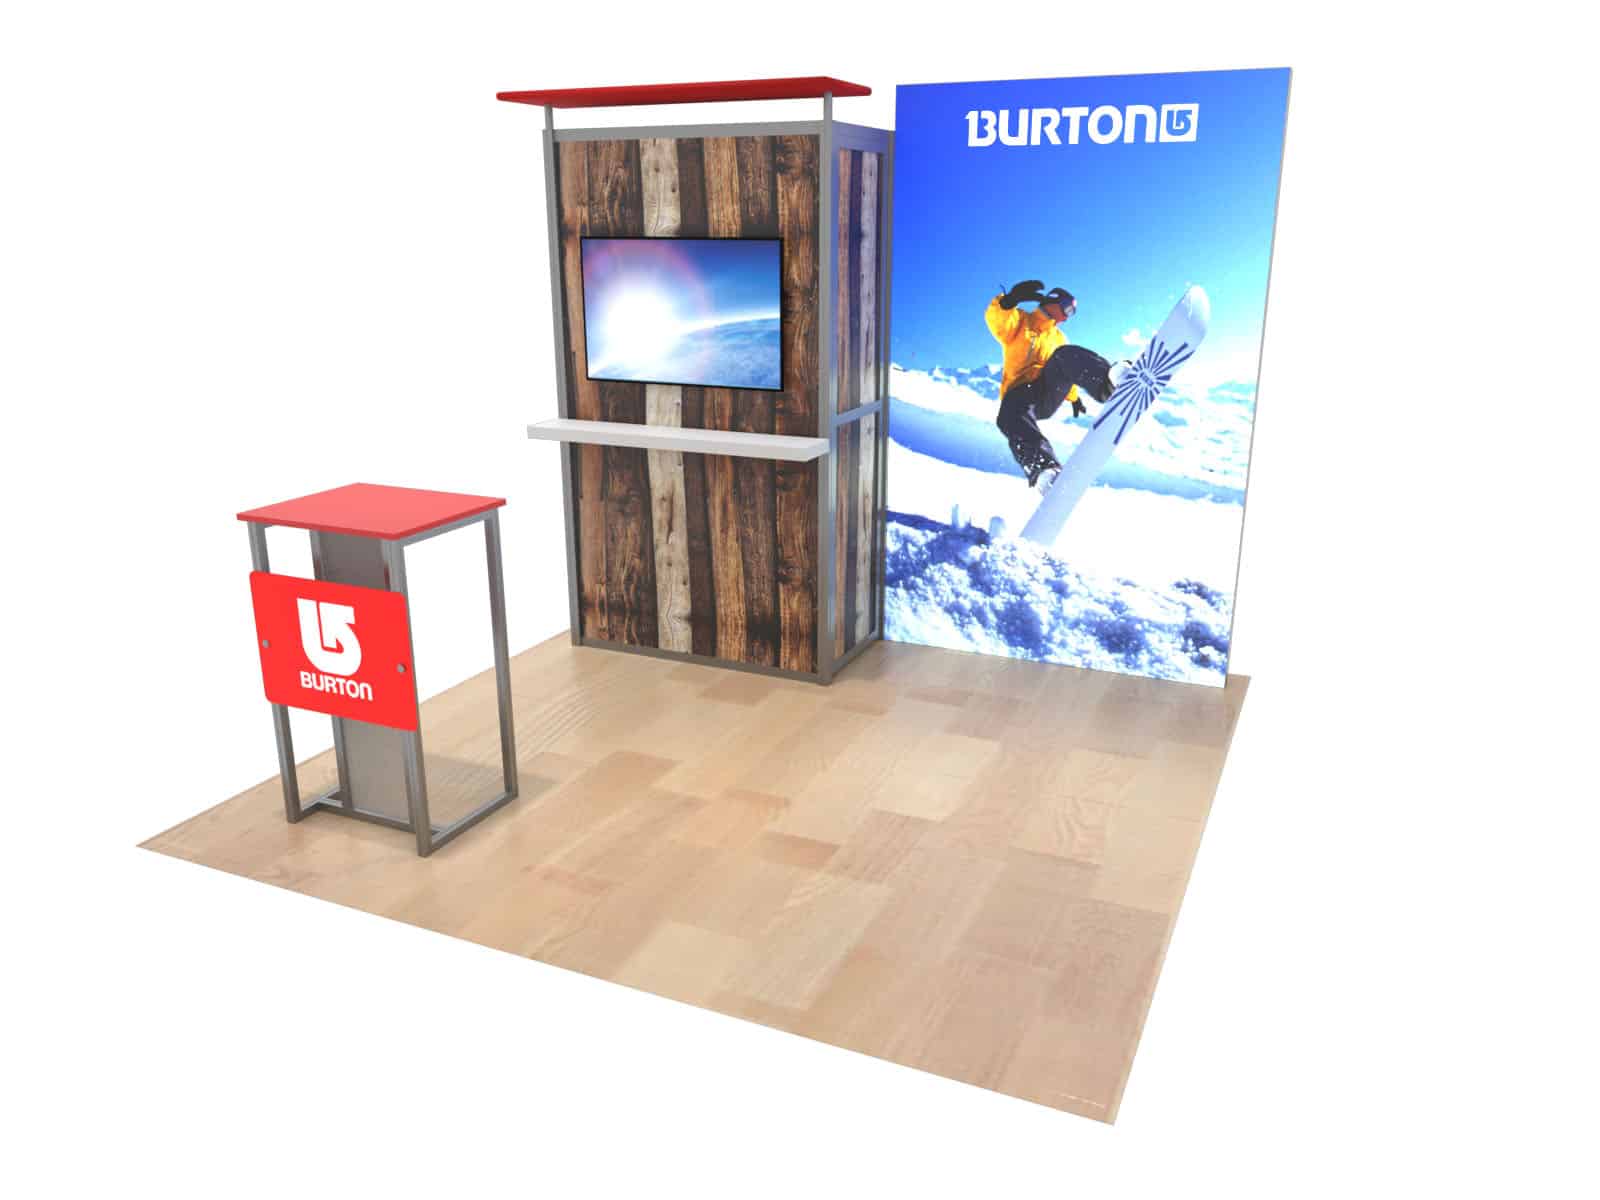 10x10 trade show booth with high resolution banner graphic design